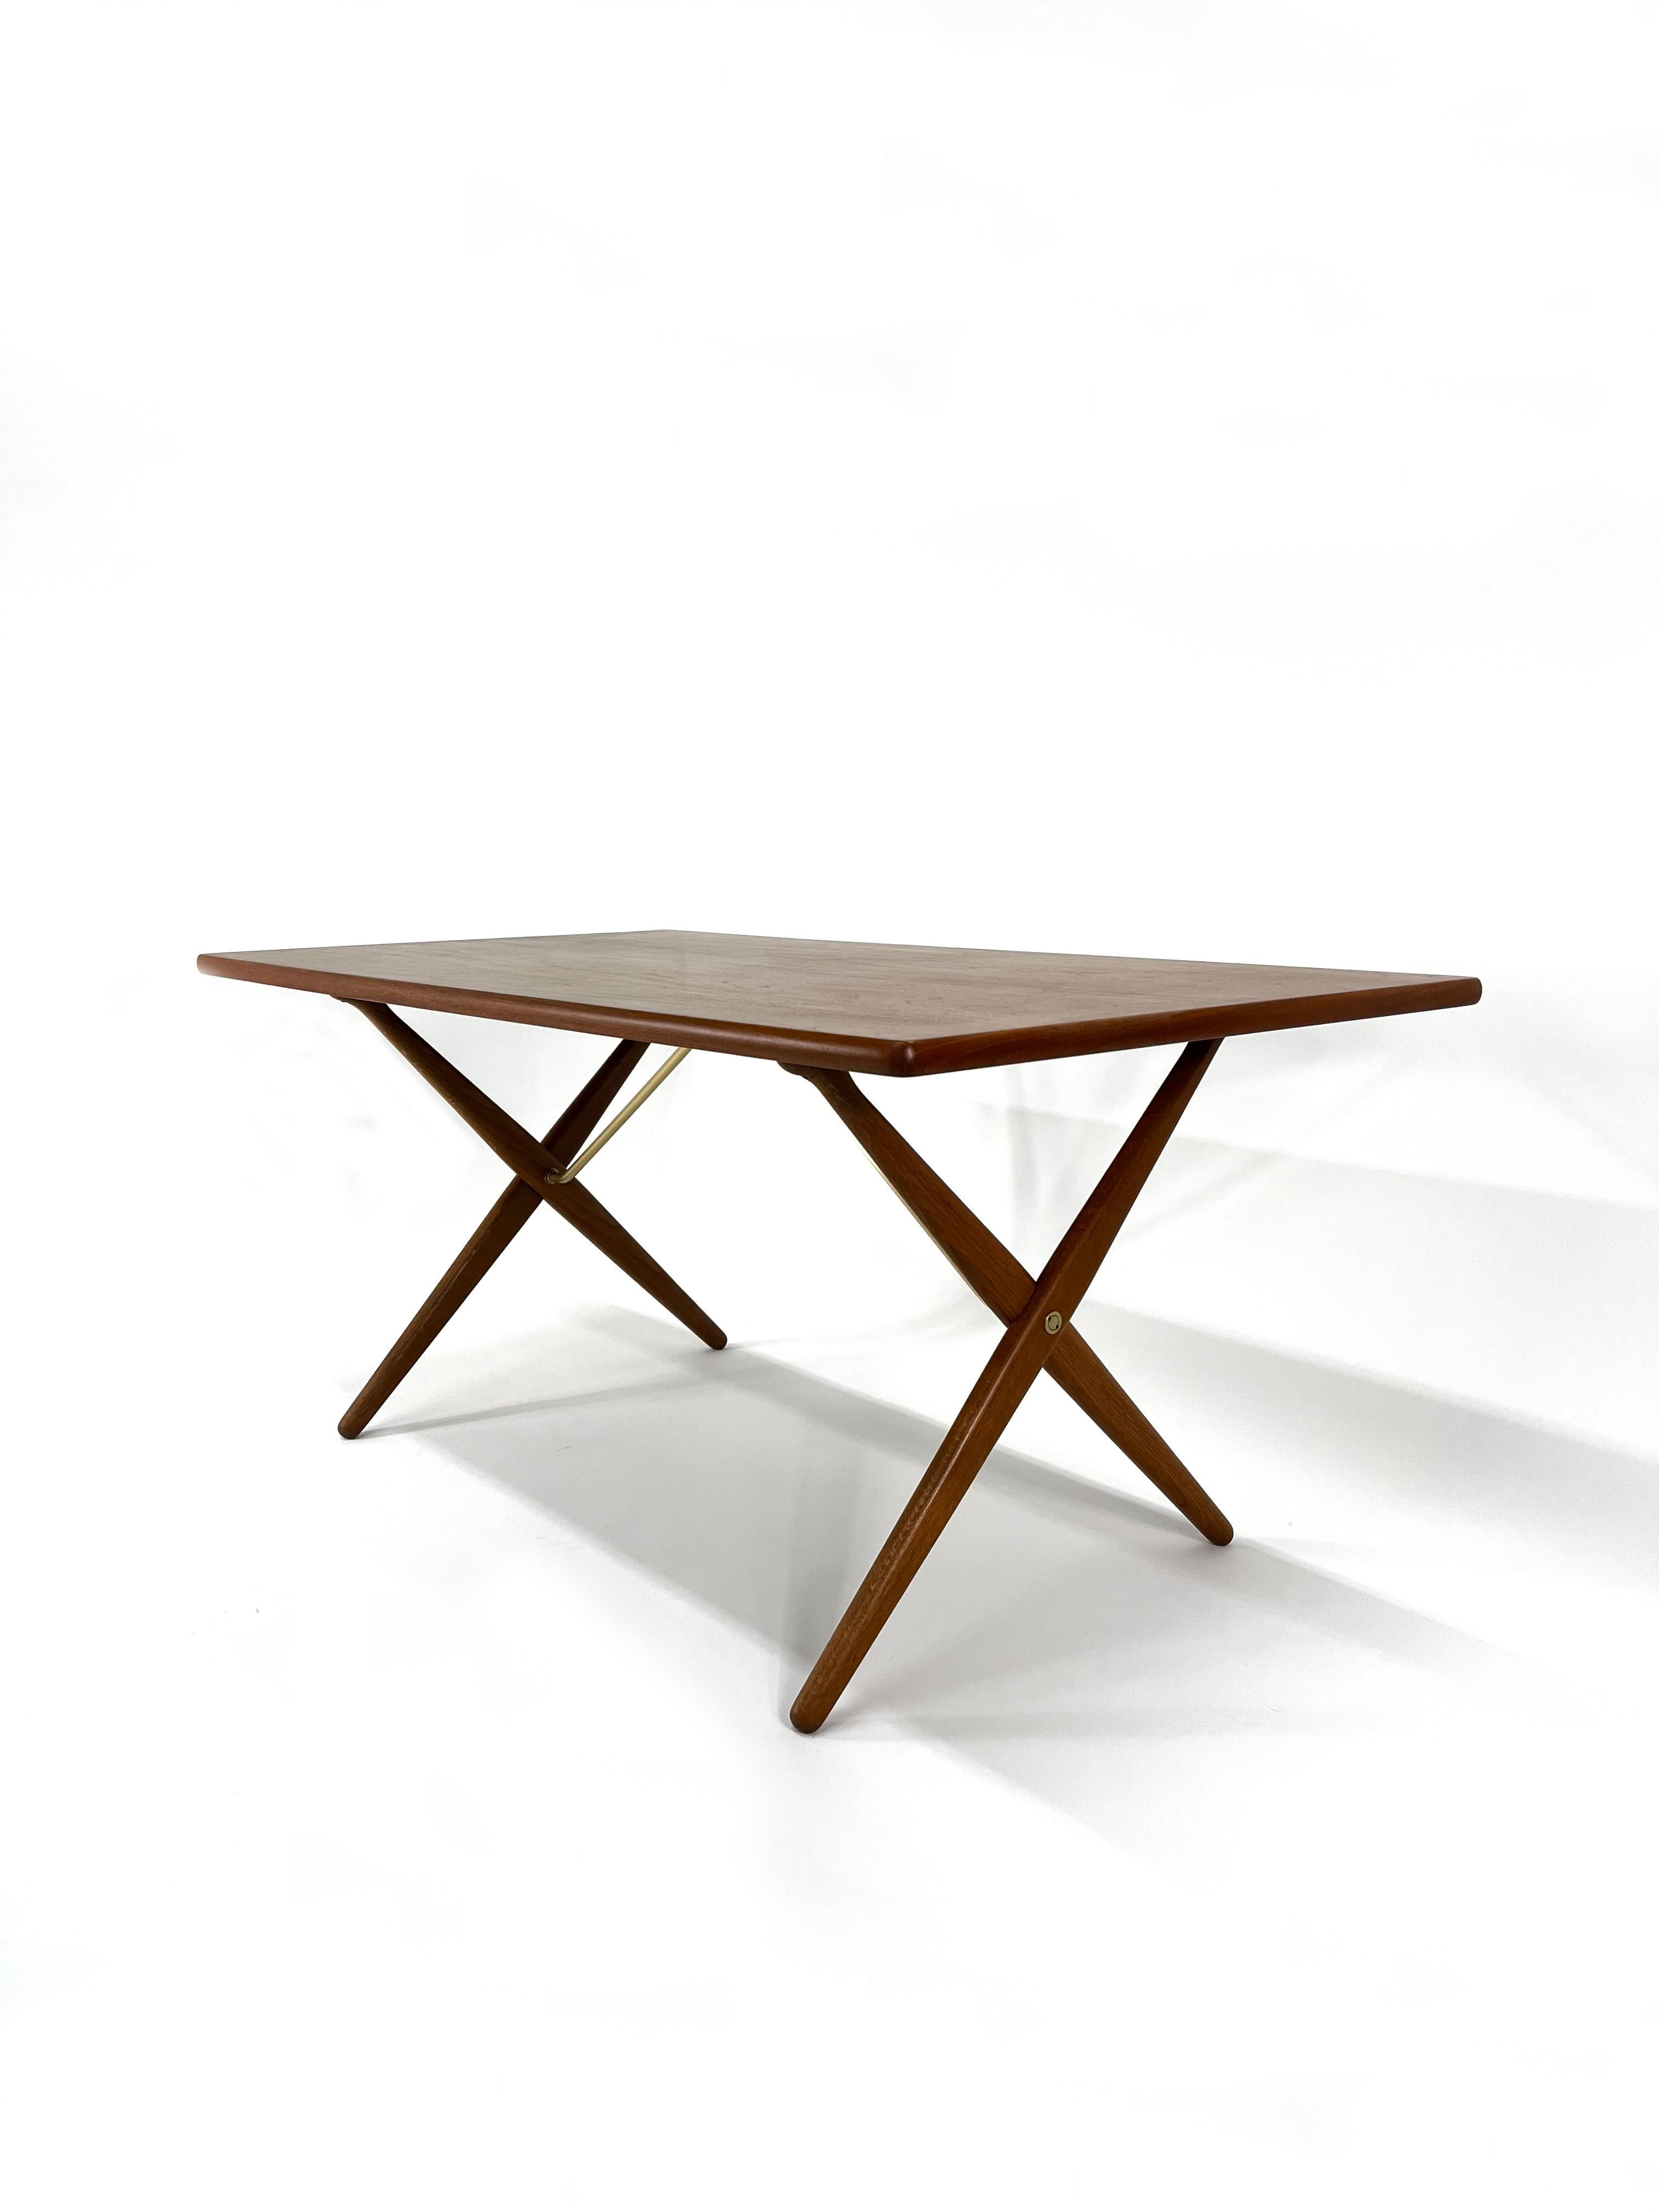 Uniquely beautiful cross-leg dining table, designed by Hans J. Wegner for Andreas Tuck, featured in Teak, Oak & Brass, is also known as the Sabre table.  Wegner designed this beautiful and functional piece that is very compelling from close up and